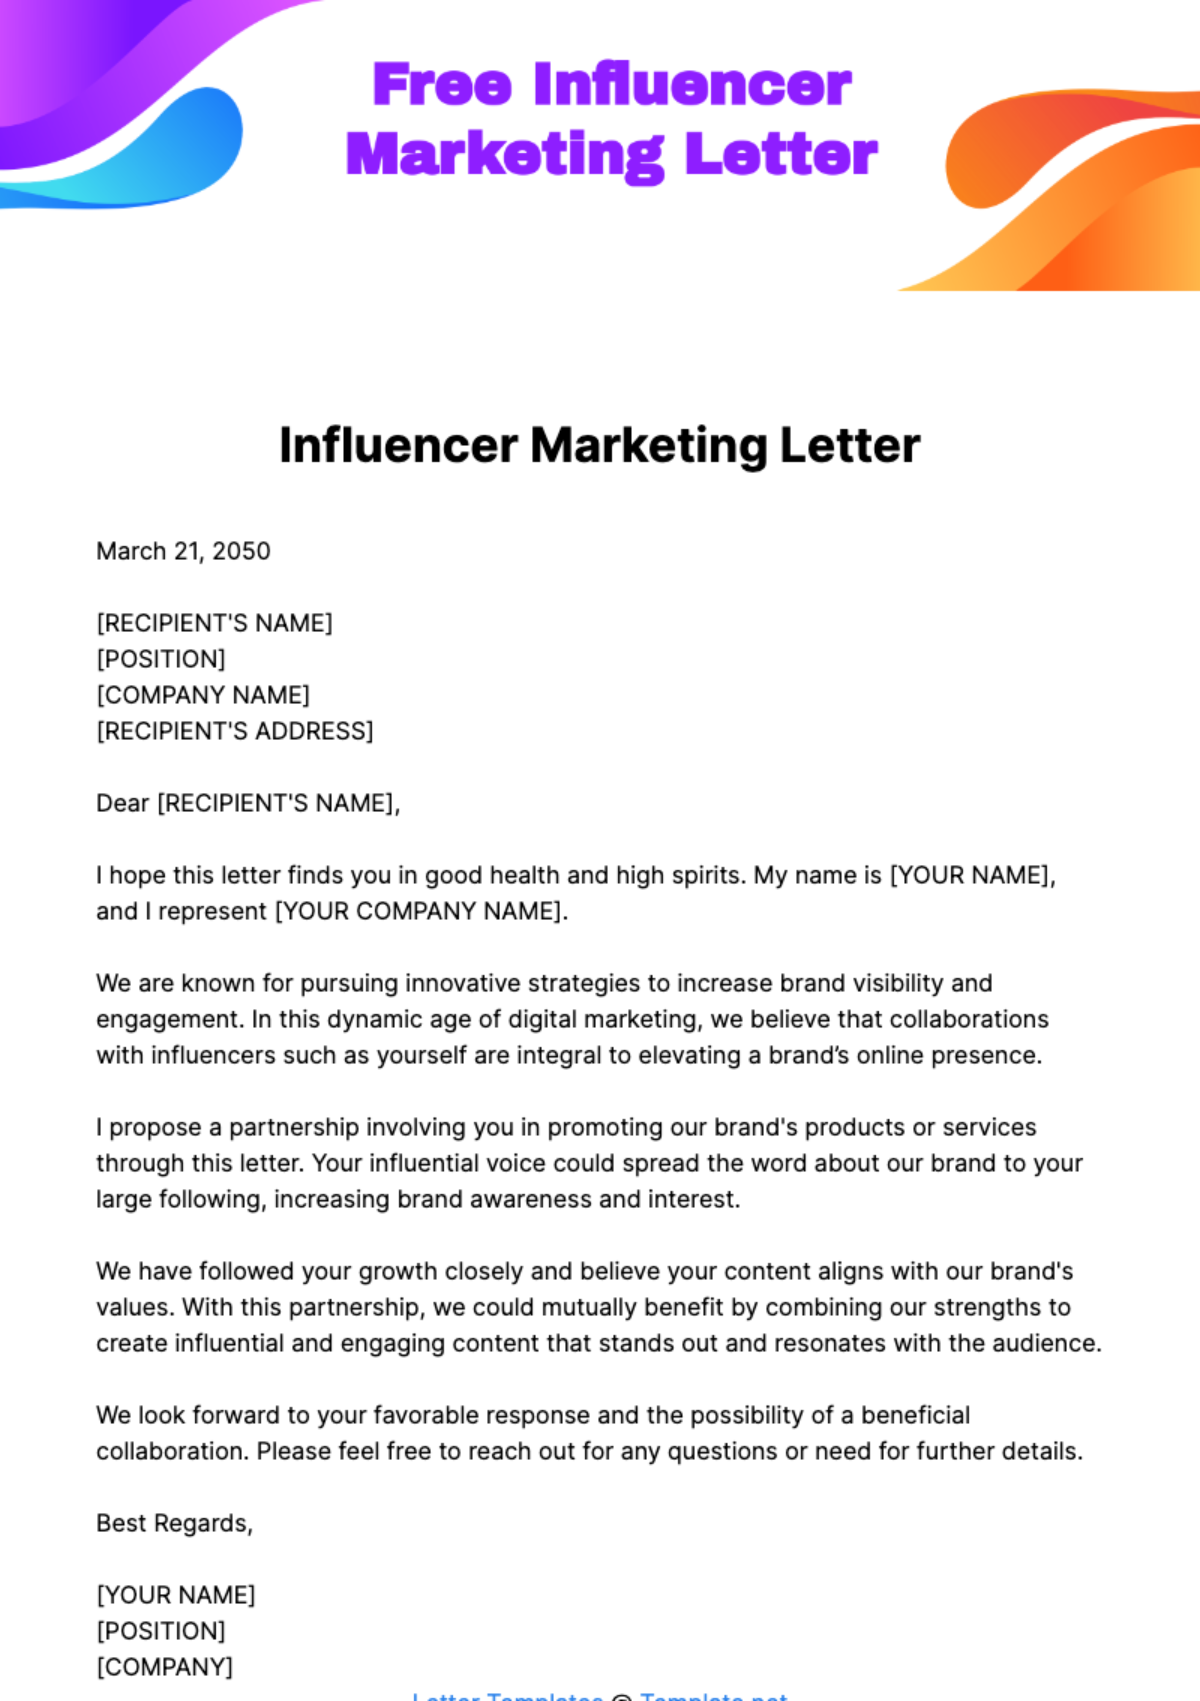 Free Influencer Marketing Letter Template